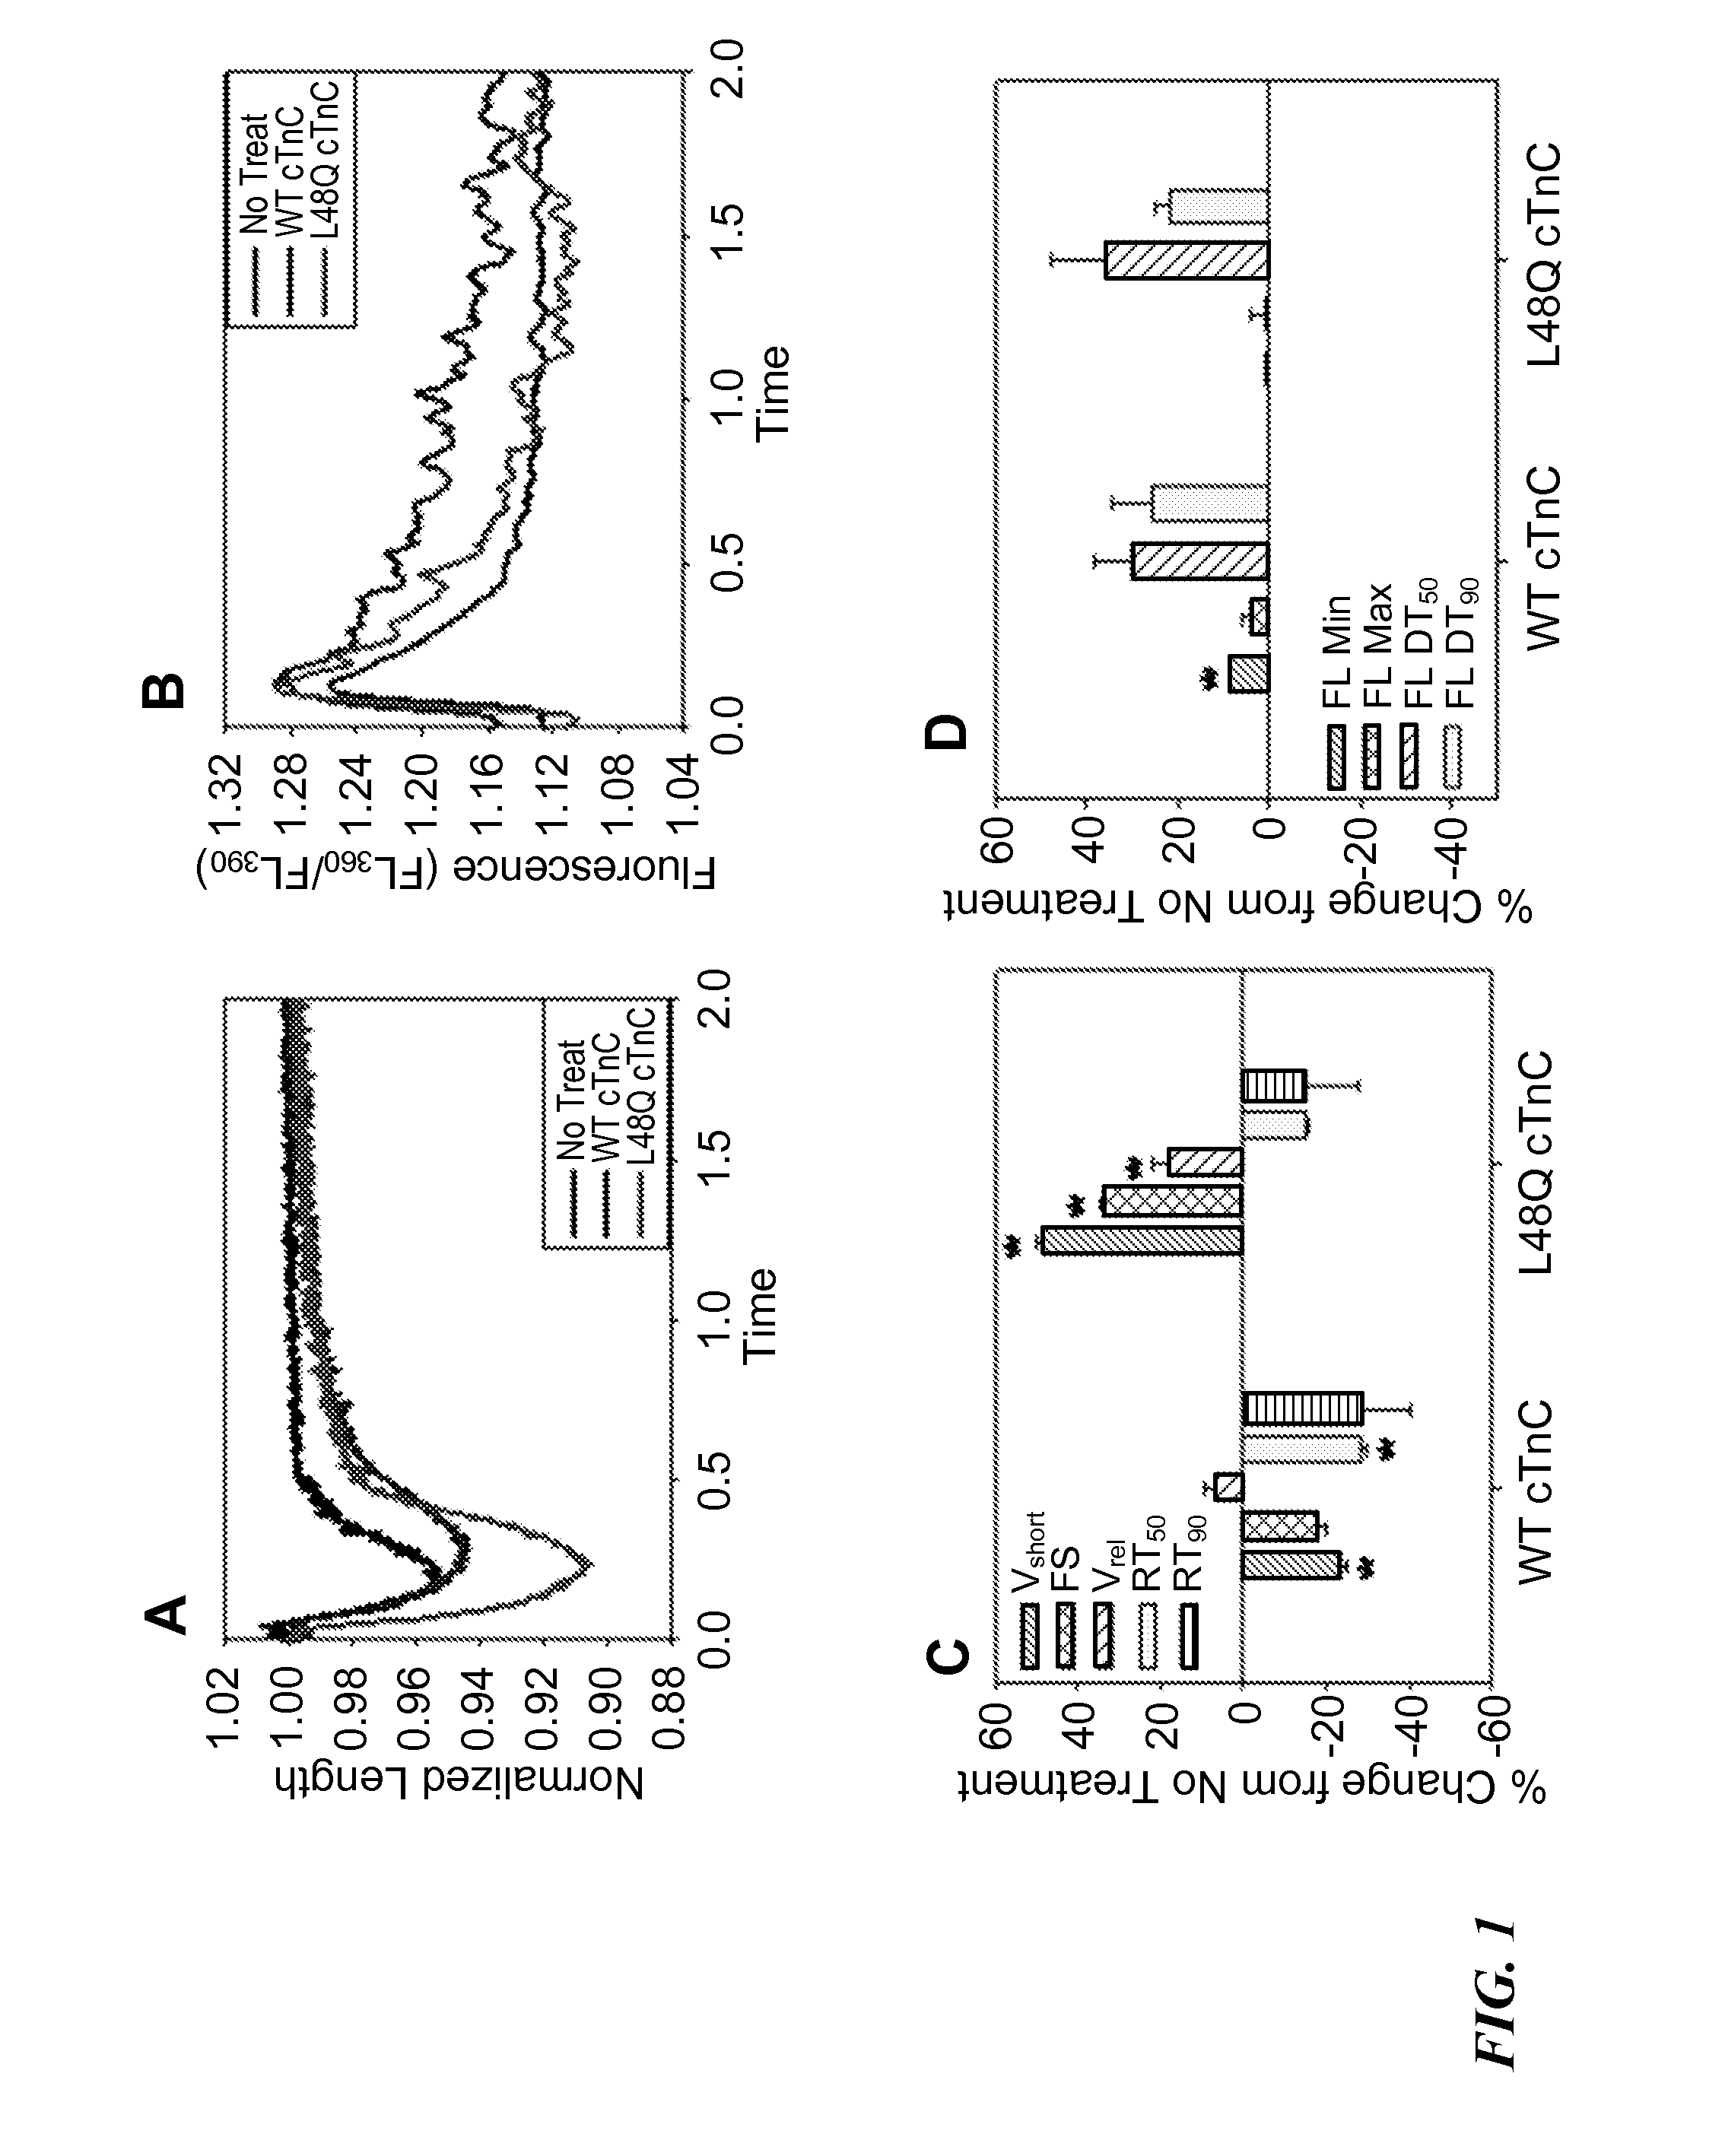 Cell and gene based methods to improve cardiac function